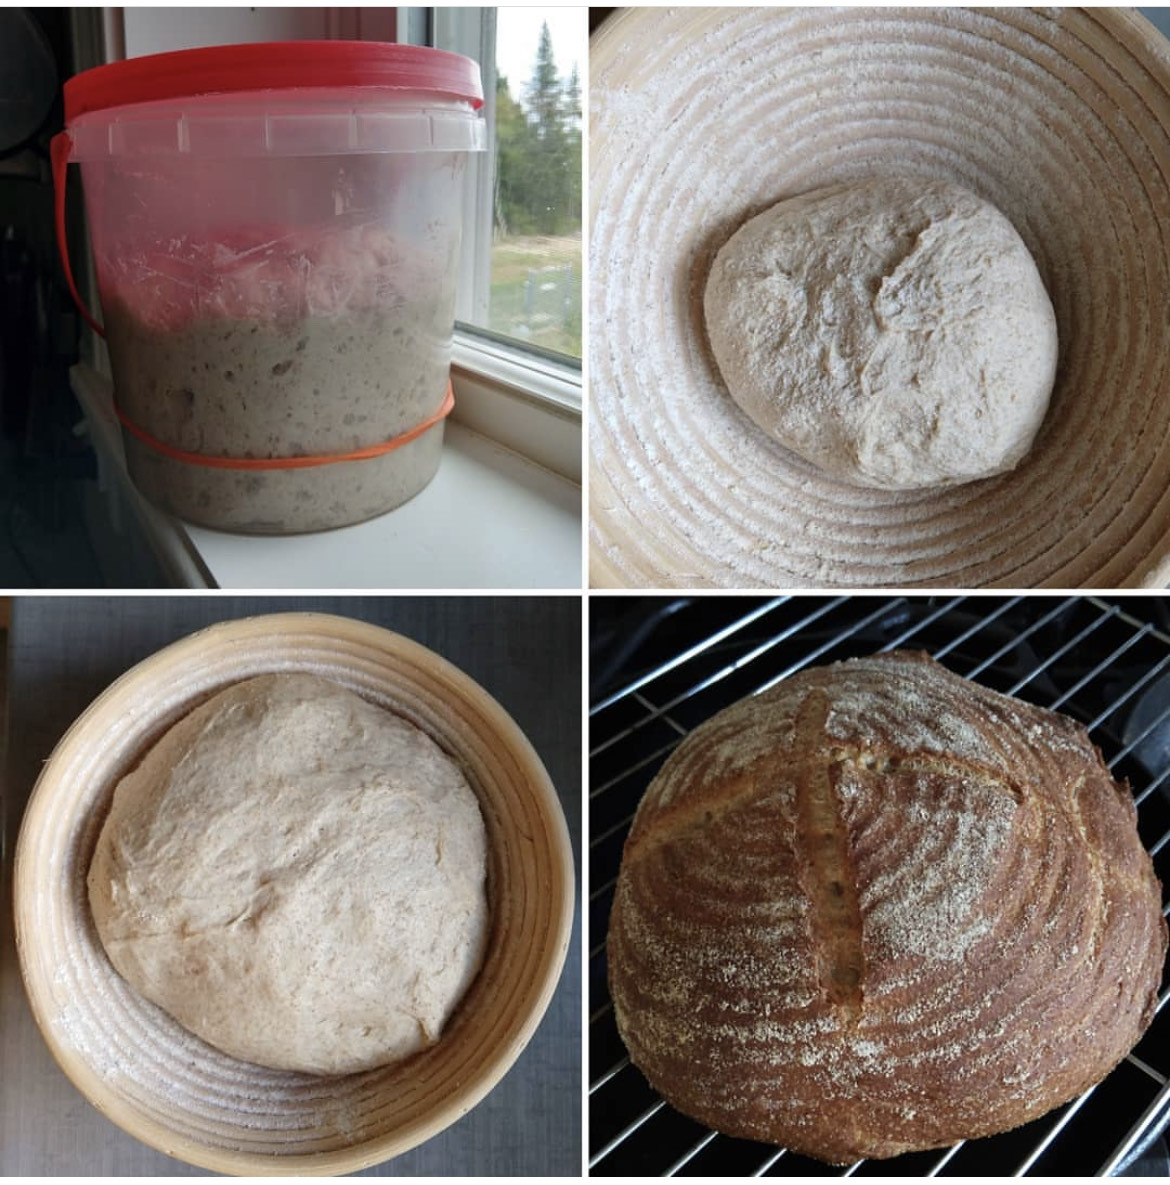 Four images: A bucket of sourdough starter, a small ball of dough, a larger raised dough ball, and a completed baked loaf of sourdough bread.